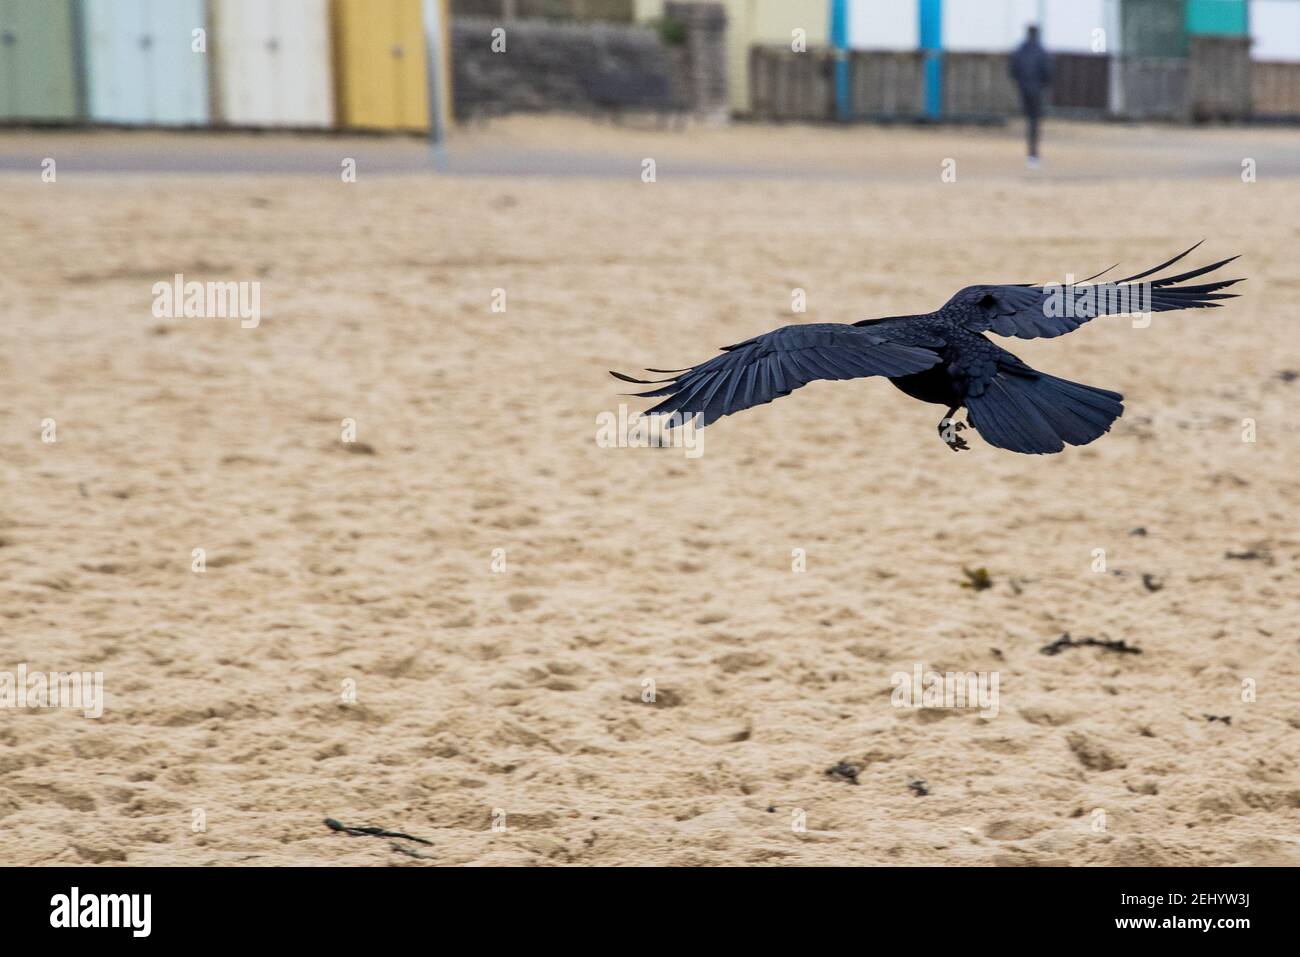 A raven flies above the beach at Fisherman’s Walk, Southbourne, Bournemouth during the lockdown and the COVID-19 coronavirus pandemic.. 20 February 20 Stock Photo